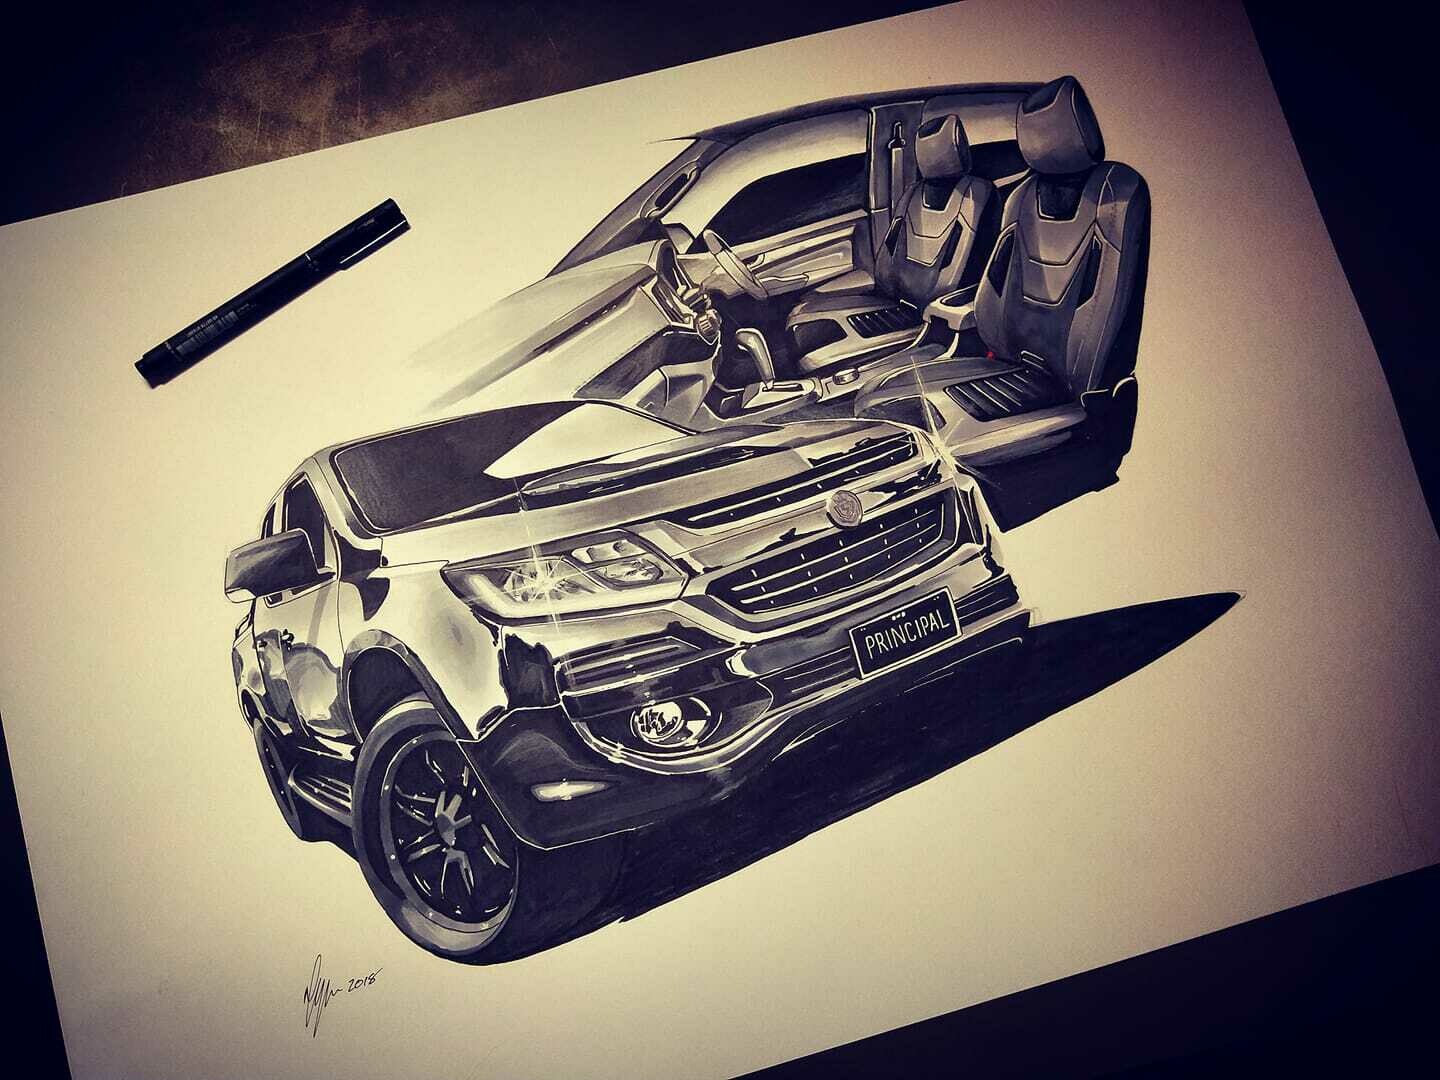 Hand Drawn Artwork of YOUR Car or Motorbike